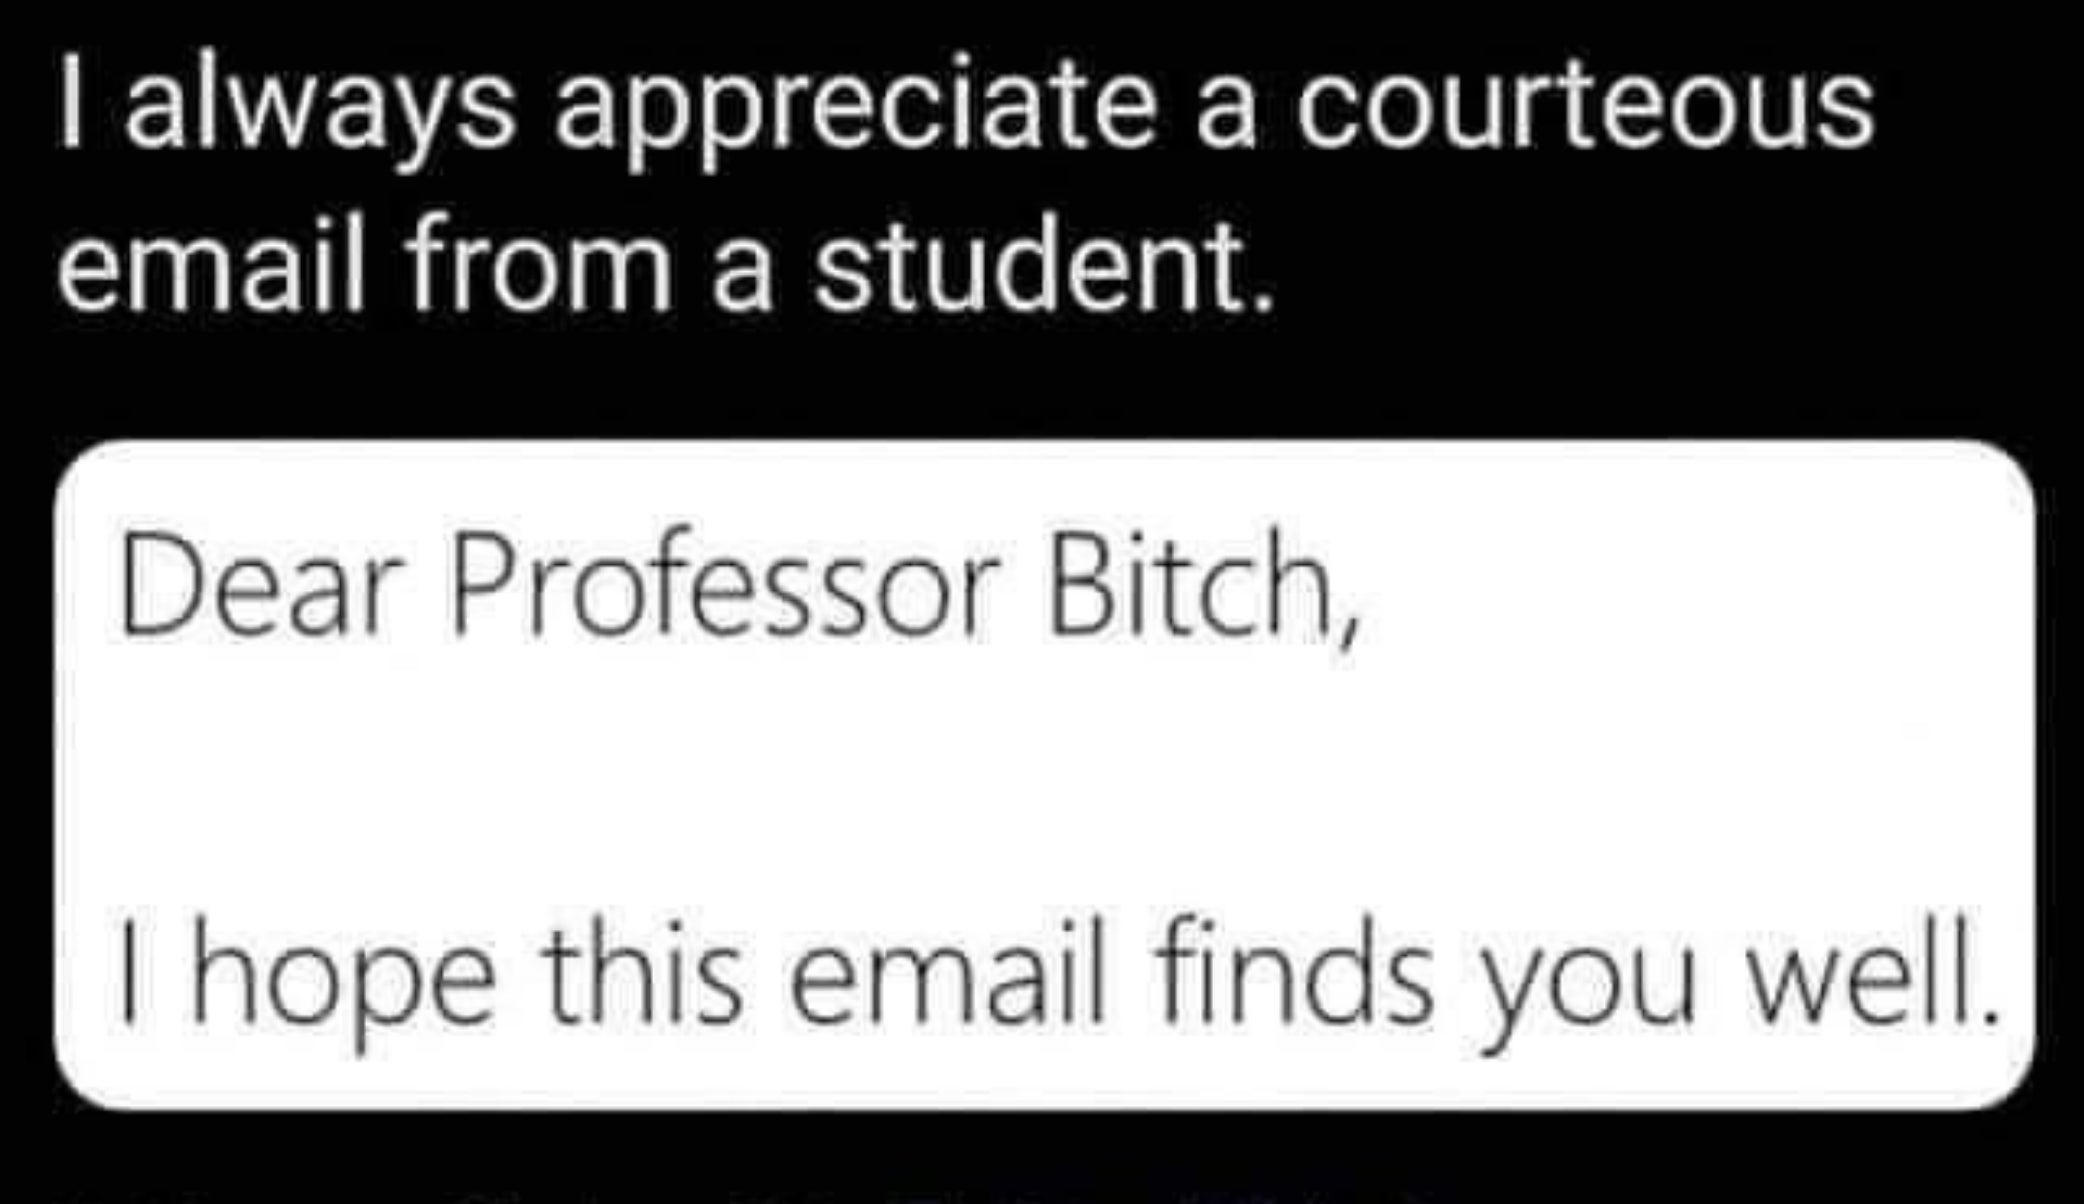 Mistyped email to a professor, humorously addressing them as &quot;Professor Bitch&quot; instead of Birch